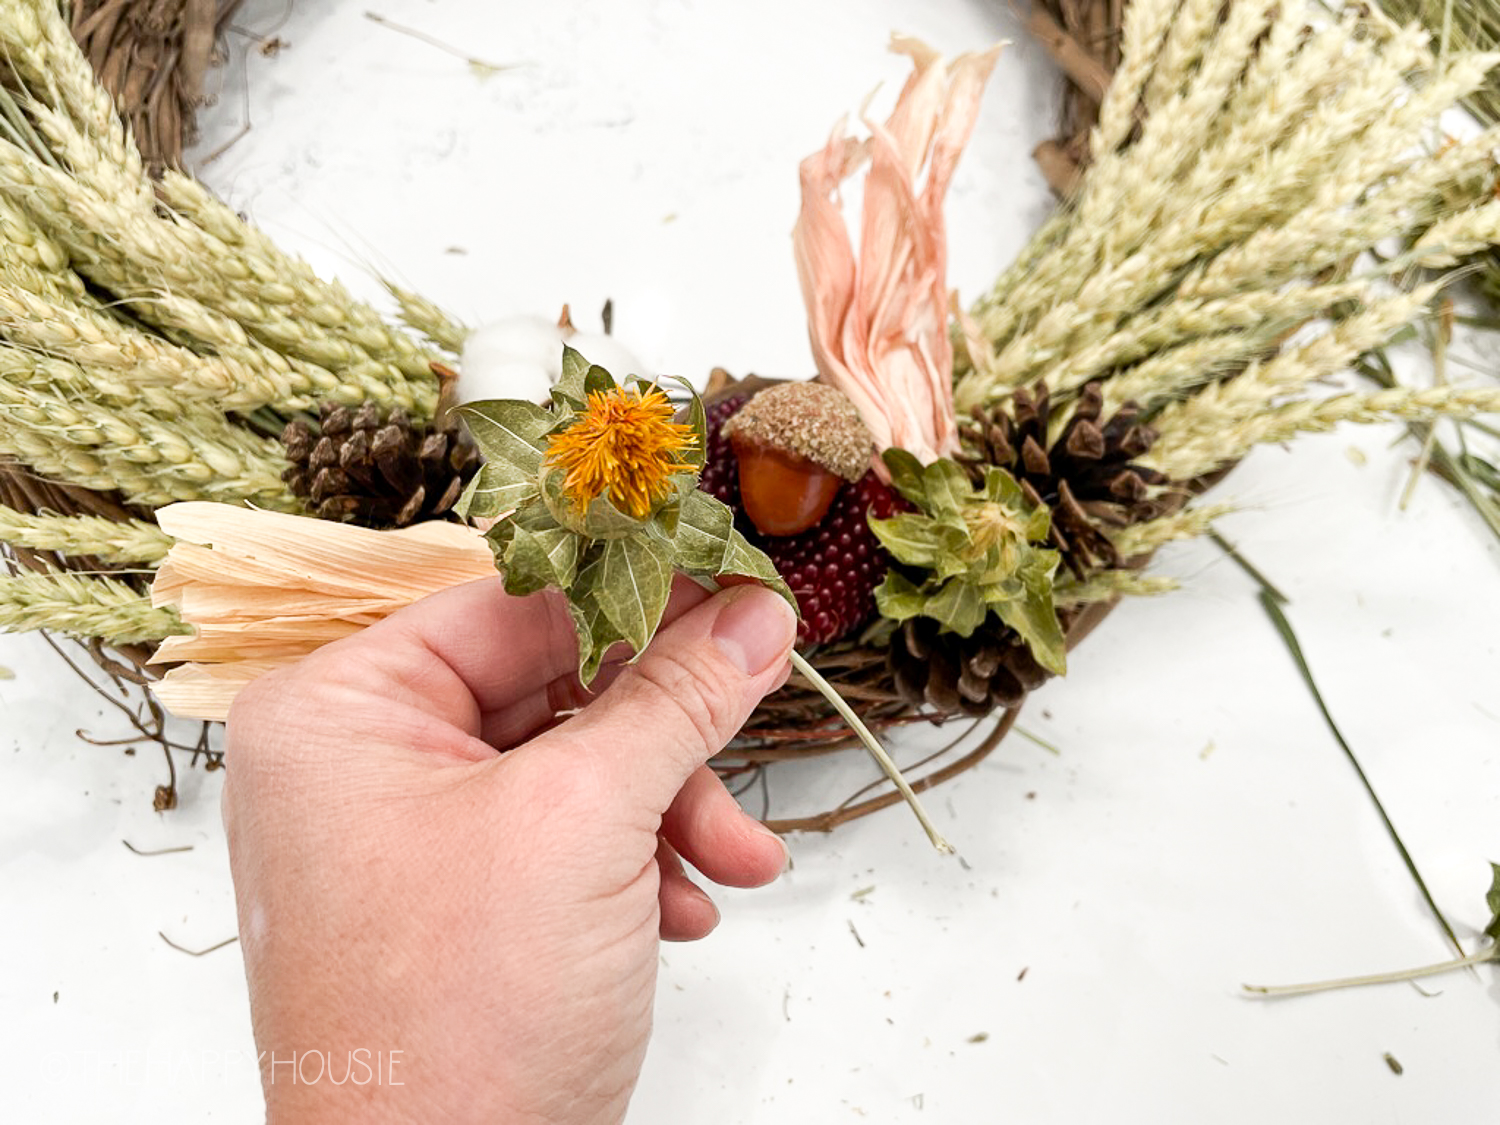 Putting a little dried yellow flower onto the wreath.